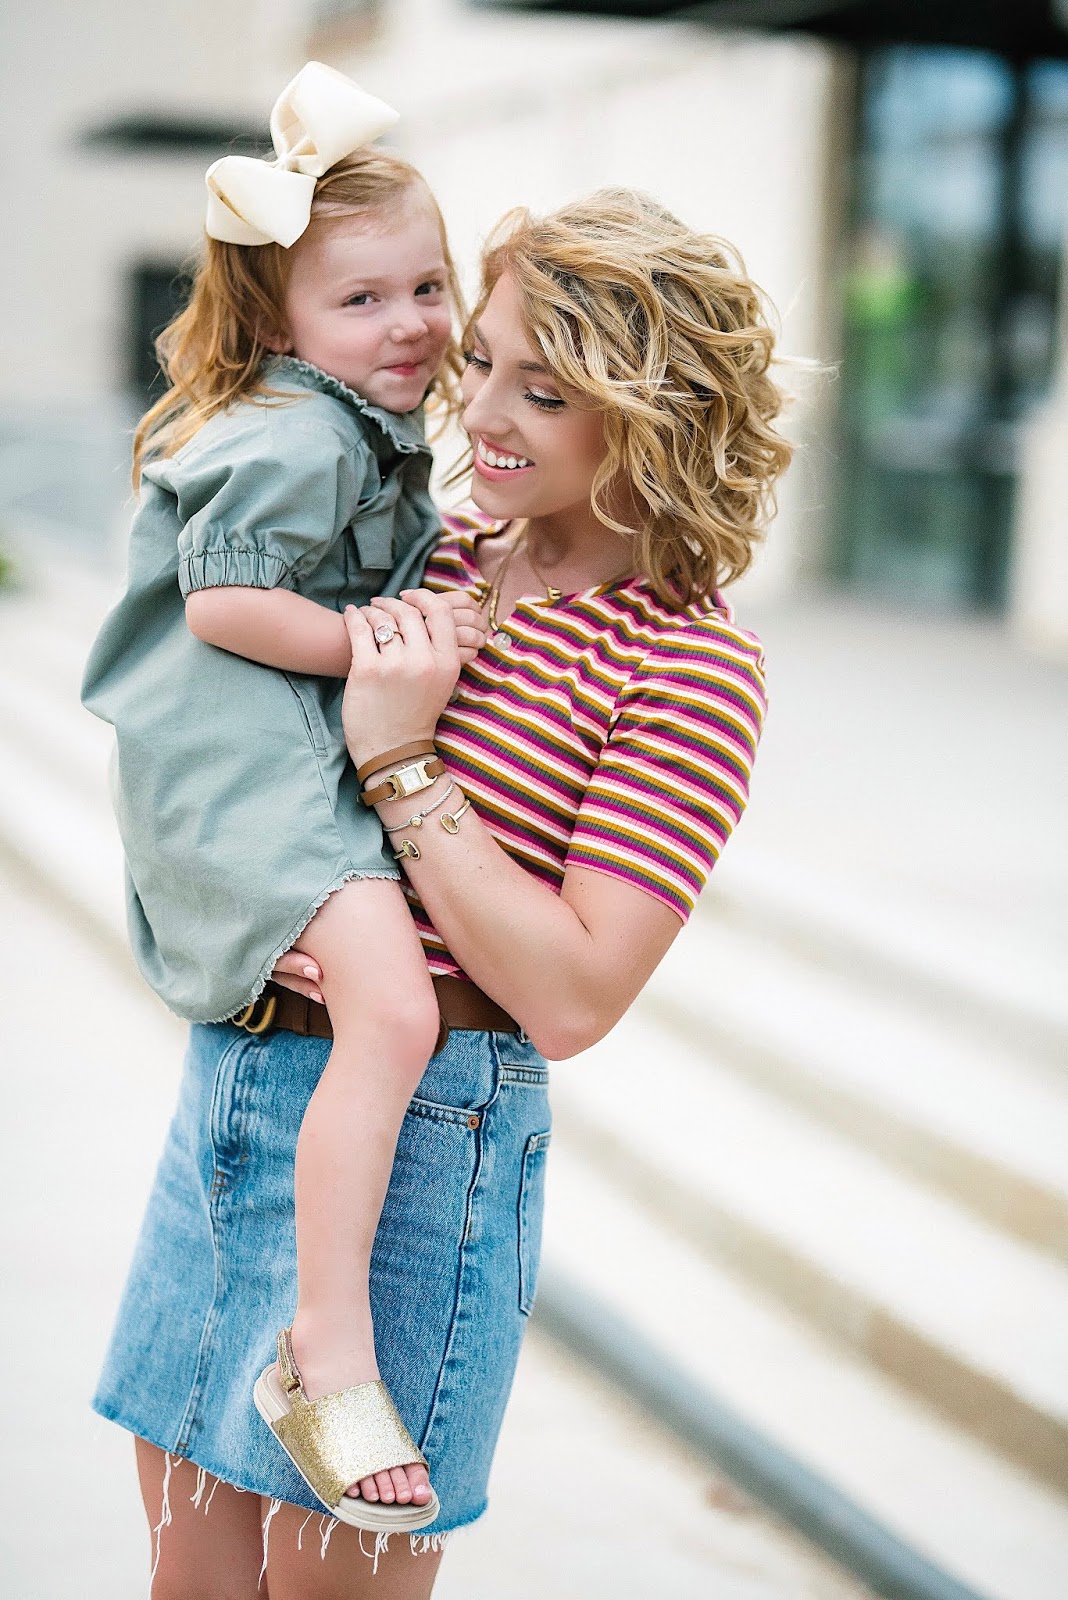 Transition to Fall Looks for Both Moms and Kids - Something Delightful Blog